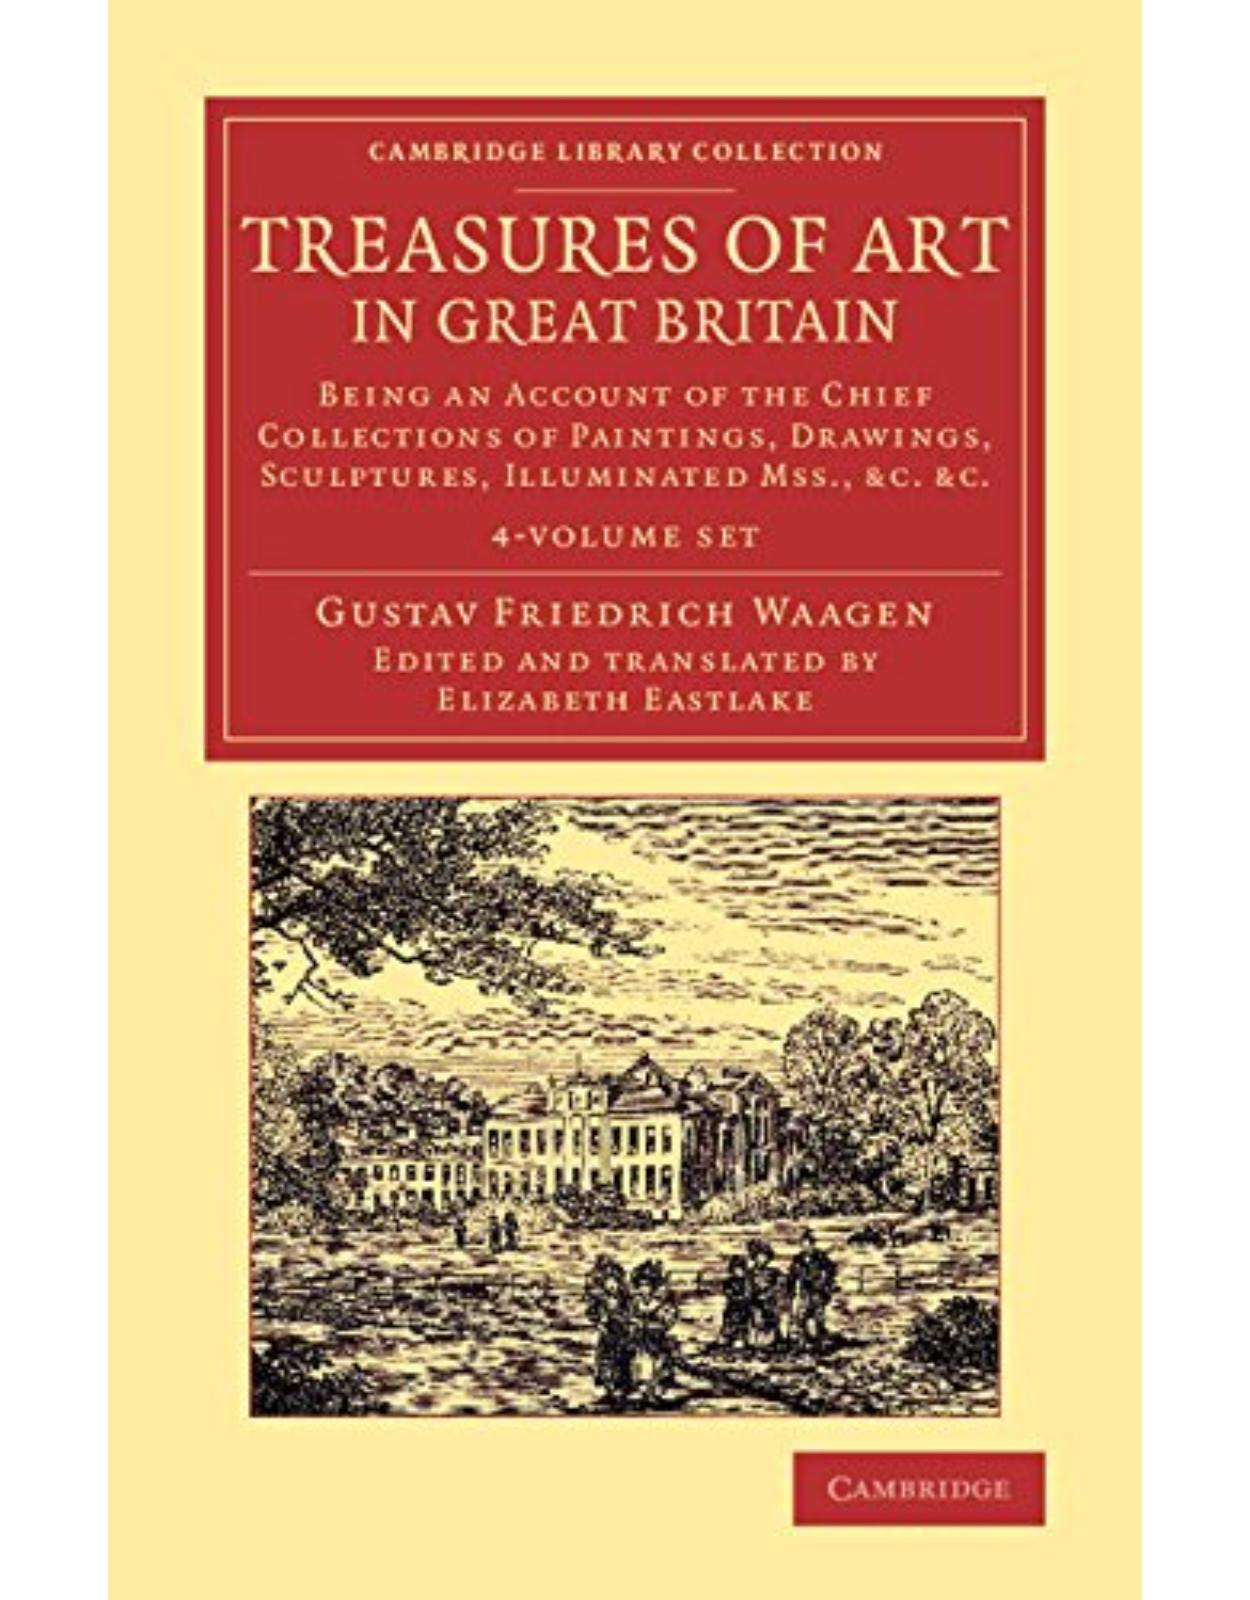 Treasures of Art in Great Britain 4 Volume Set: Being an Account of the Chief Collections of Paintings, Drawings, Sculptures, Illuminated Mss. (Cambridge Library Collection - Art and Architecture)